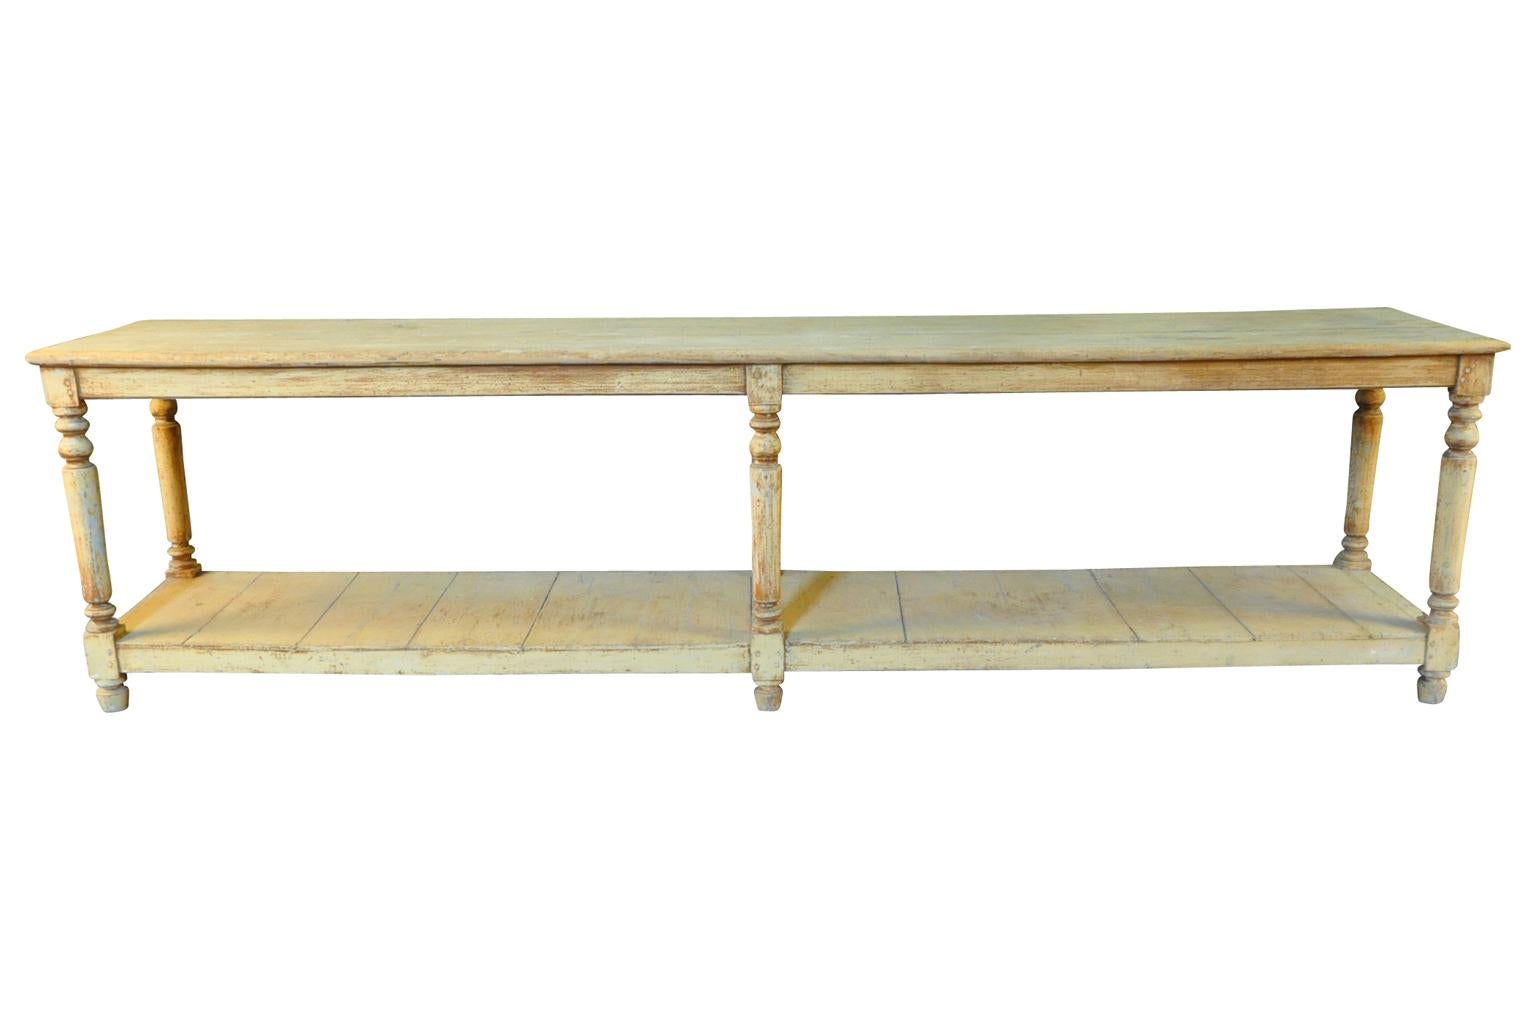 A very lovely later 19th century Draper's Table from the South of France. Soundly constructed from painted wood with beautifully turned legs and a base shelf. Serves wonderfully as a console table, room divider or serving piece. Terrific patina.